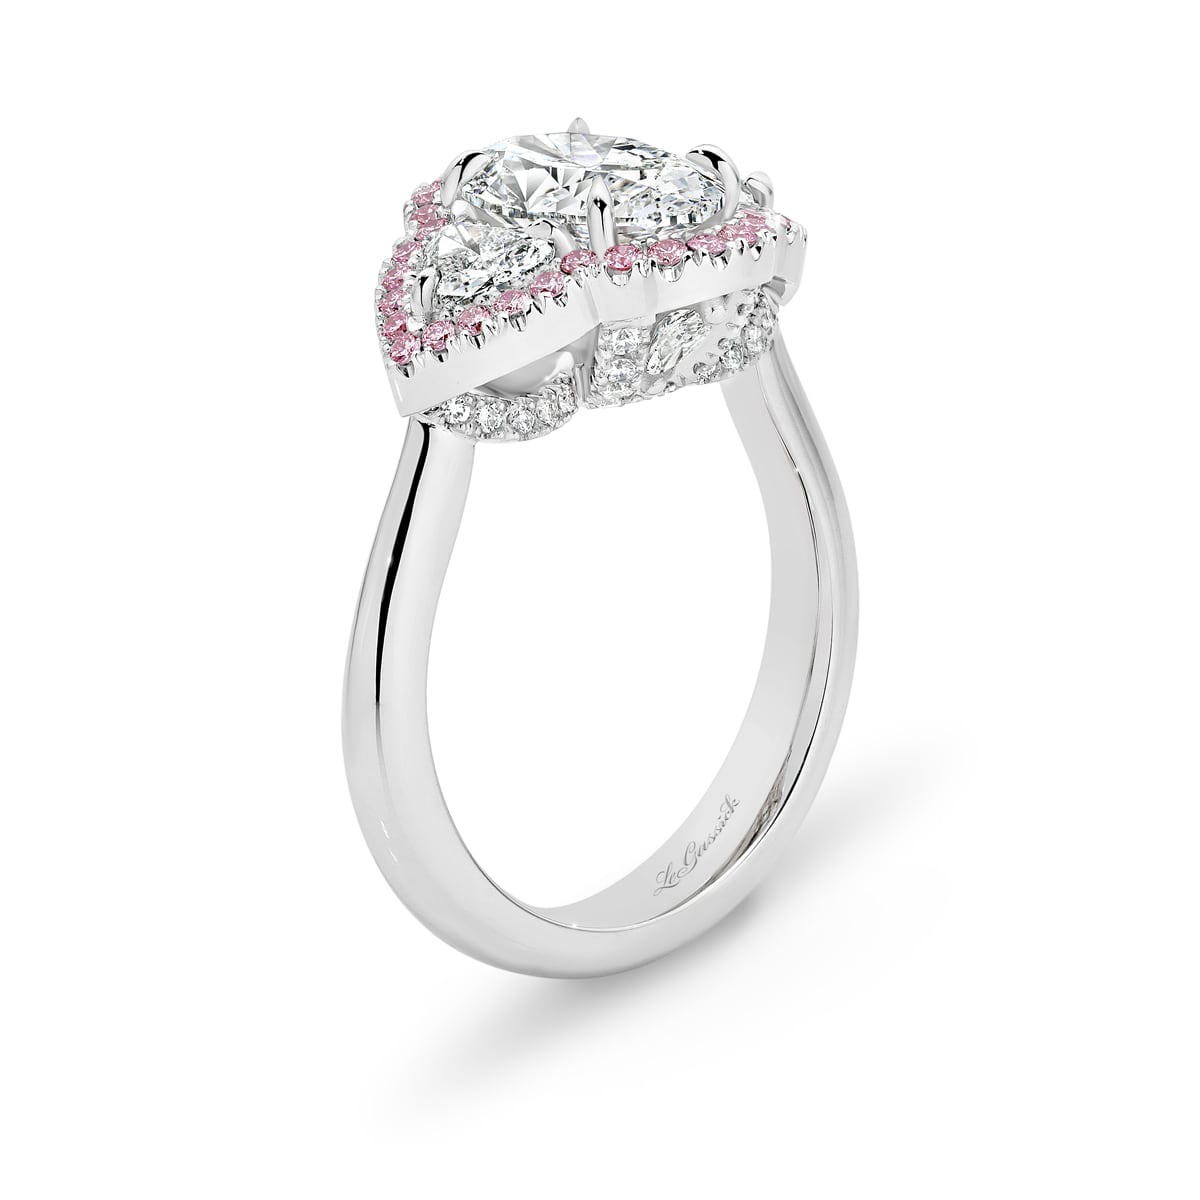 Katerina is a white & pink diamond ring with a 2 carat oval centre stone. She was designed and handcrafted by LeGassick's Master Jewellers, Gold Coast, Australia.